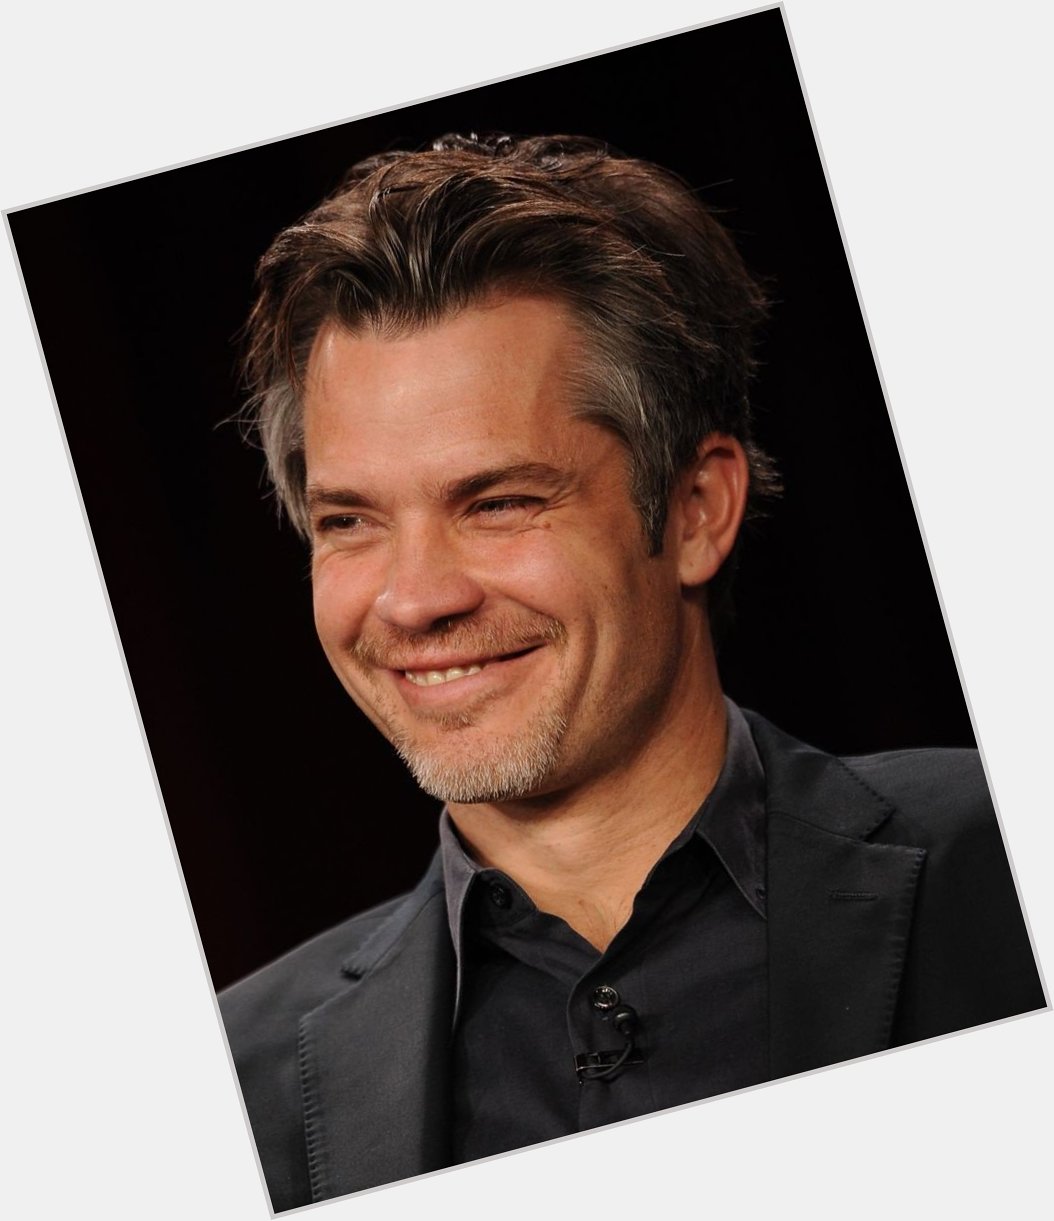 Happy timothy olyphant day y\all it\s his birthday and i love him so much 